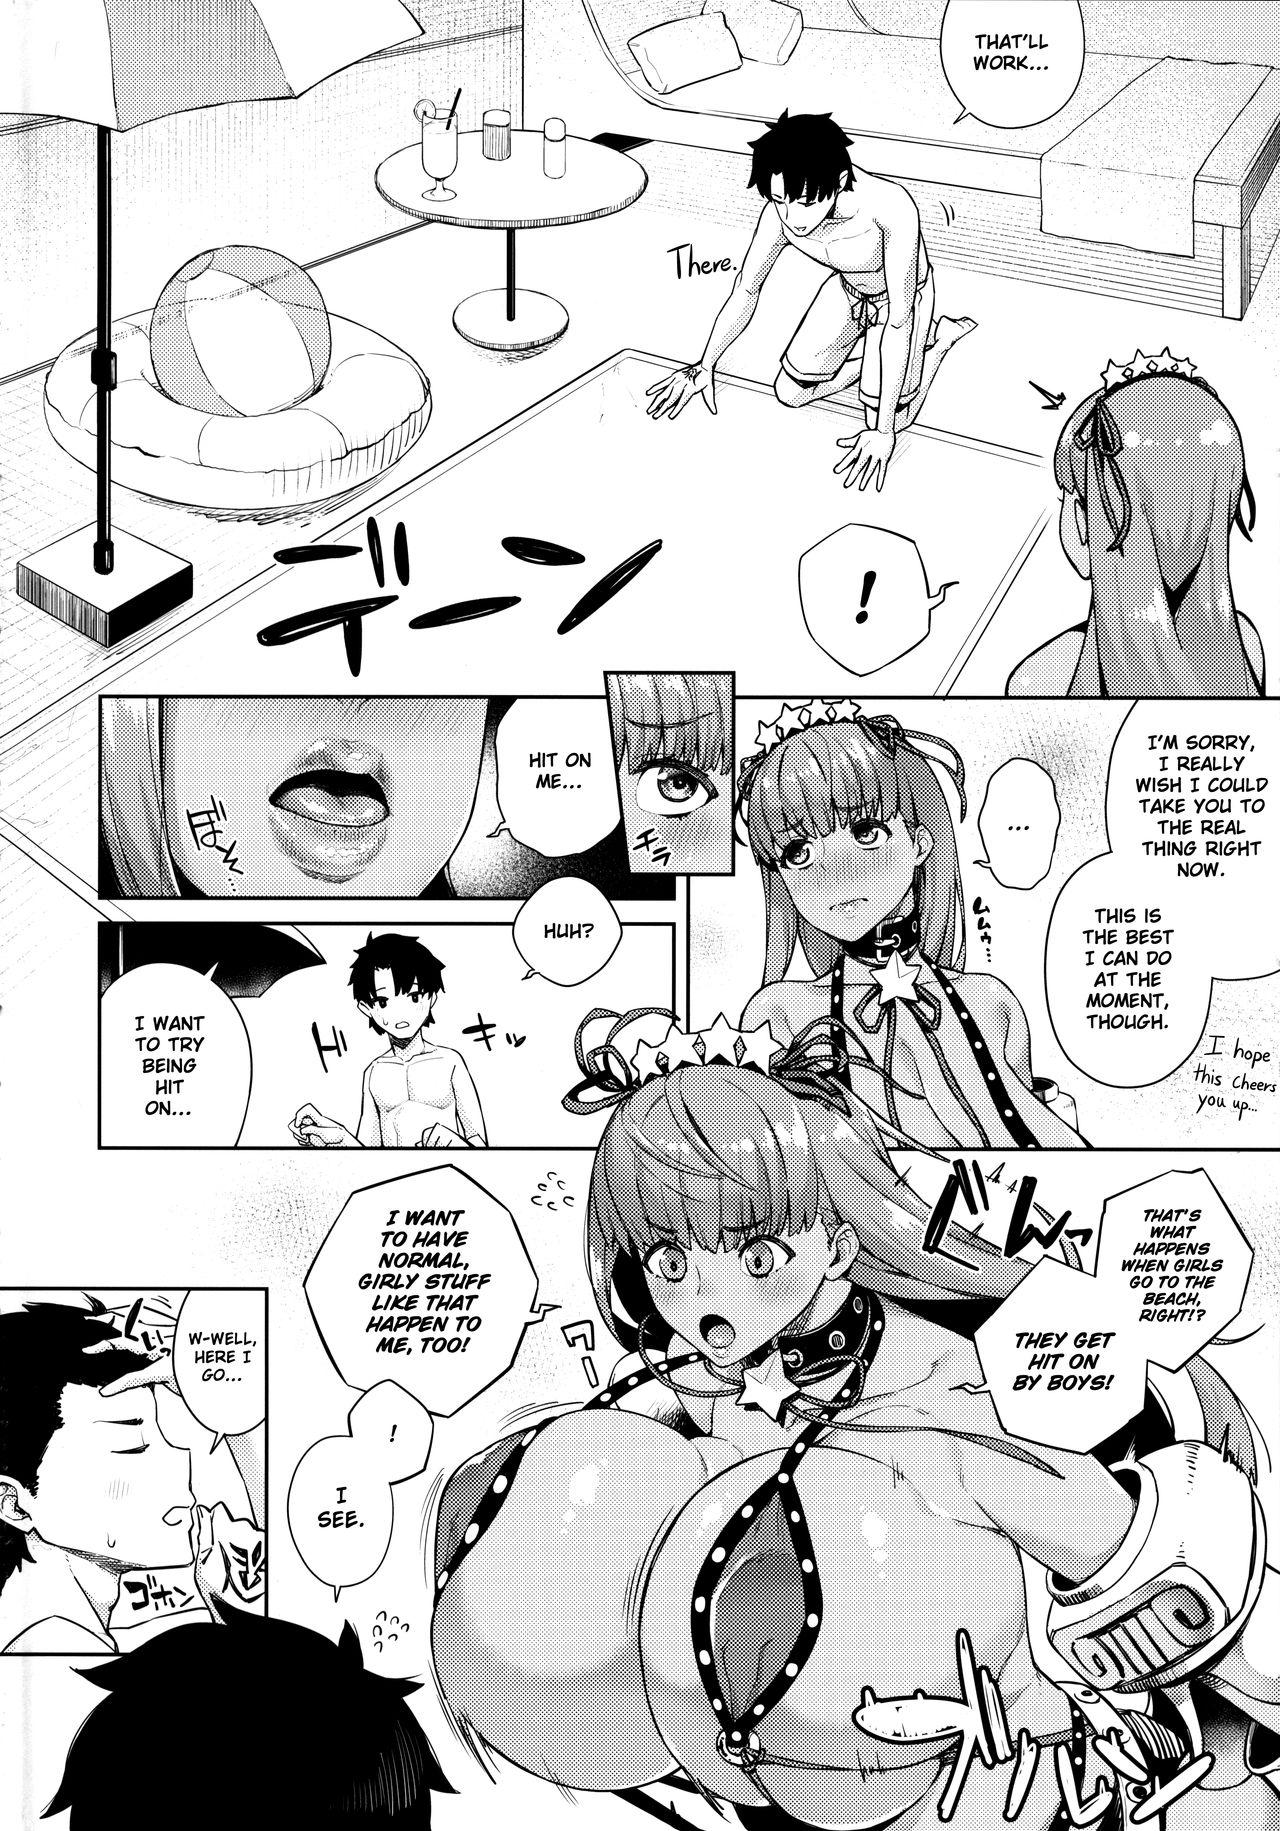 New Kyokou no Umibe nite | at the fictional seaside - Fate grand order Stepdad - Page 4